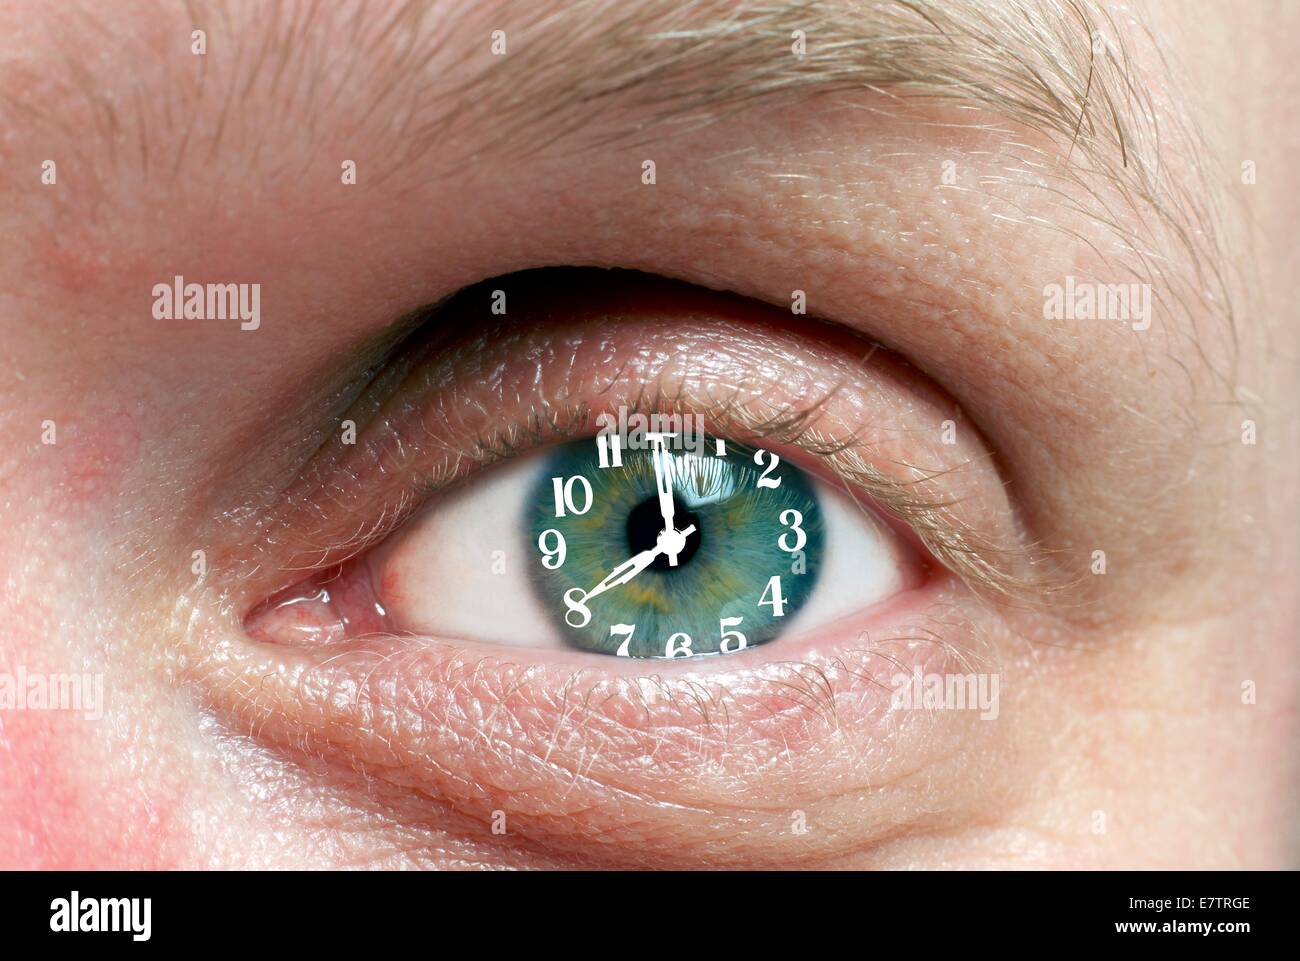 MODEL RELEASED. Eye with clock, composite image. Stock Photo